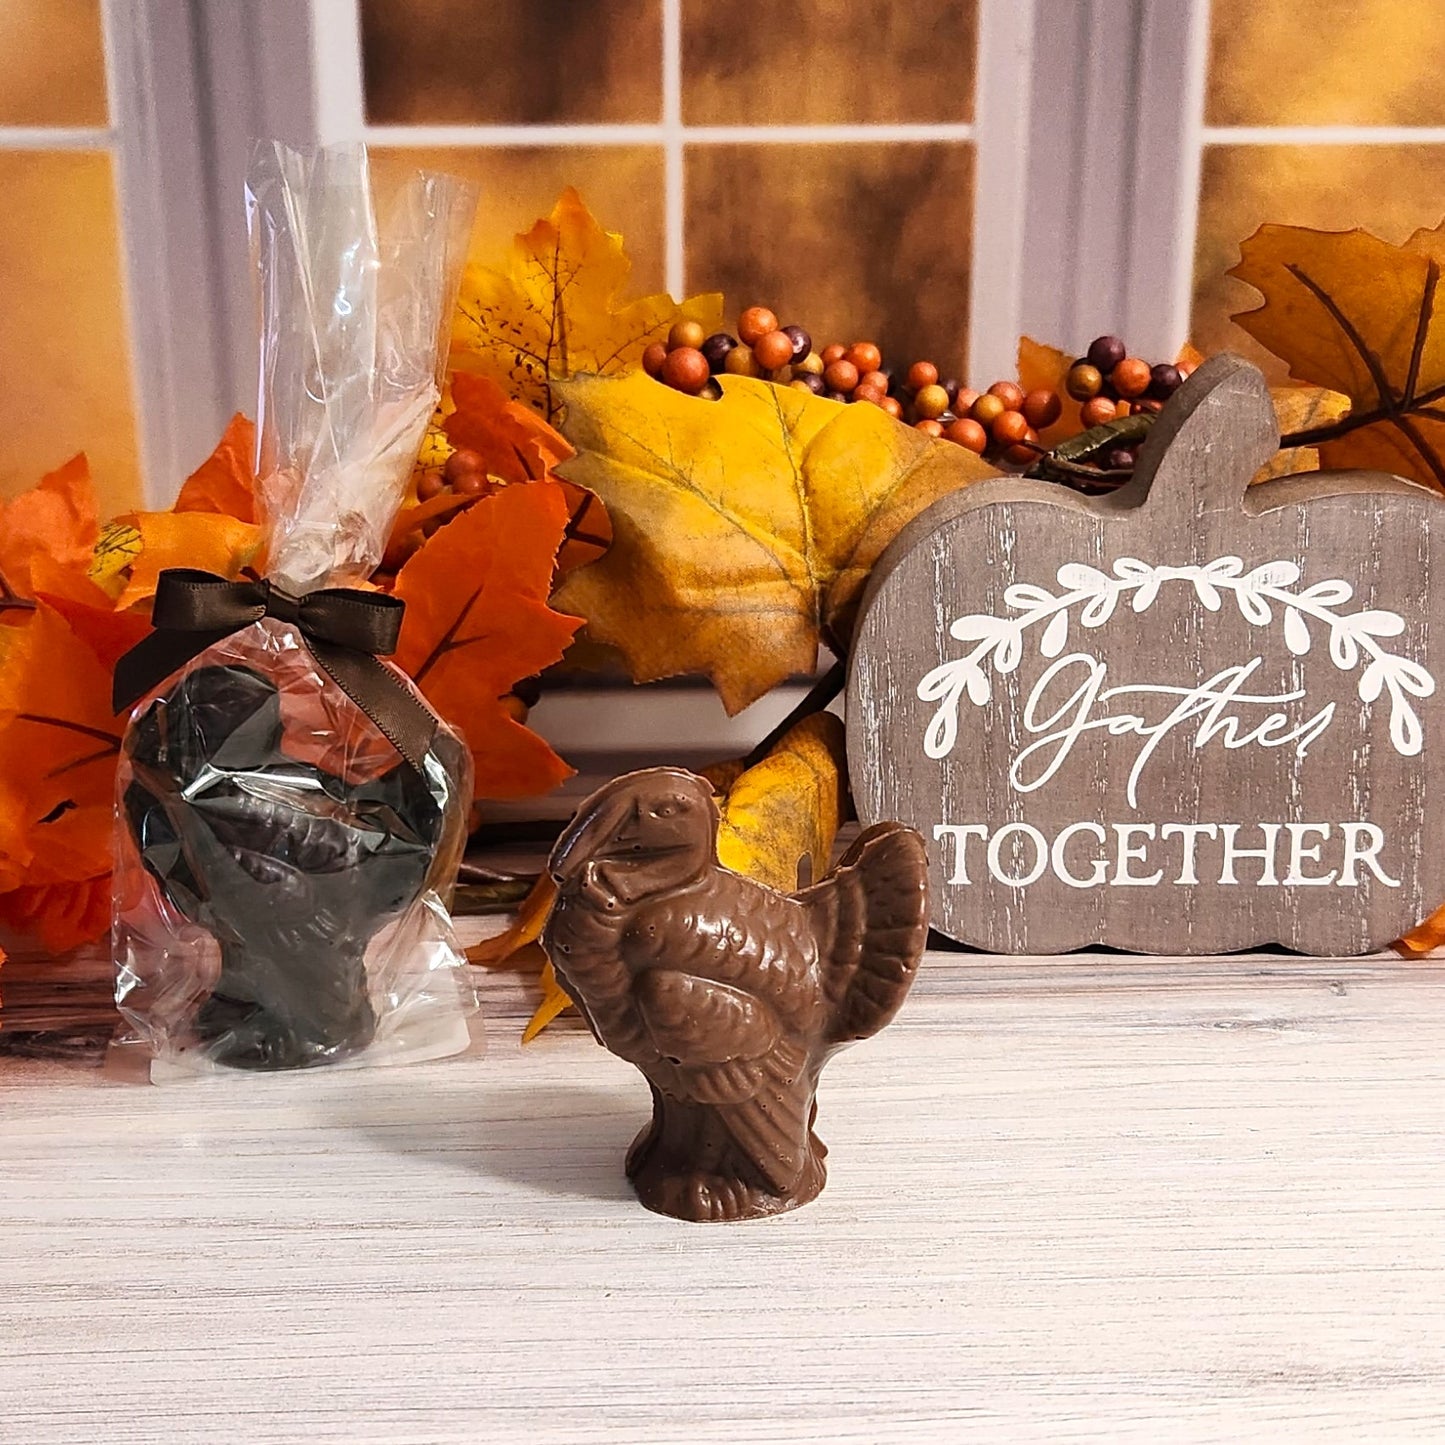 Festive Fall Chocolate Turkeys come in 3 Sizes to Choose From!